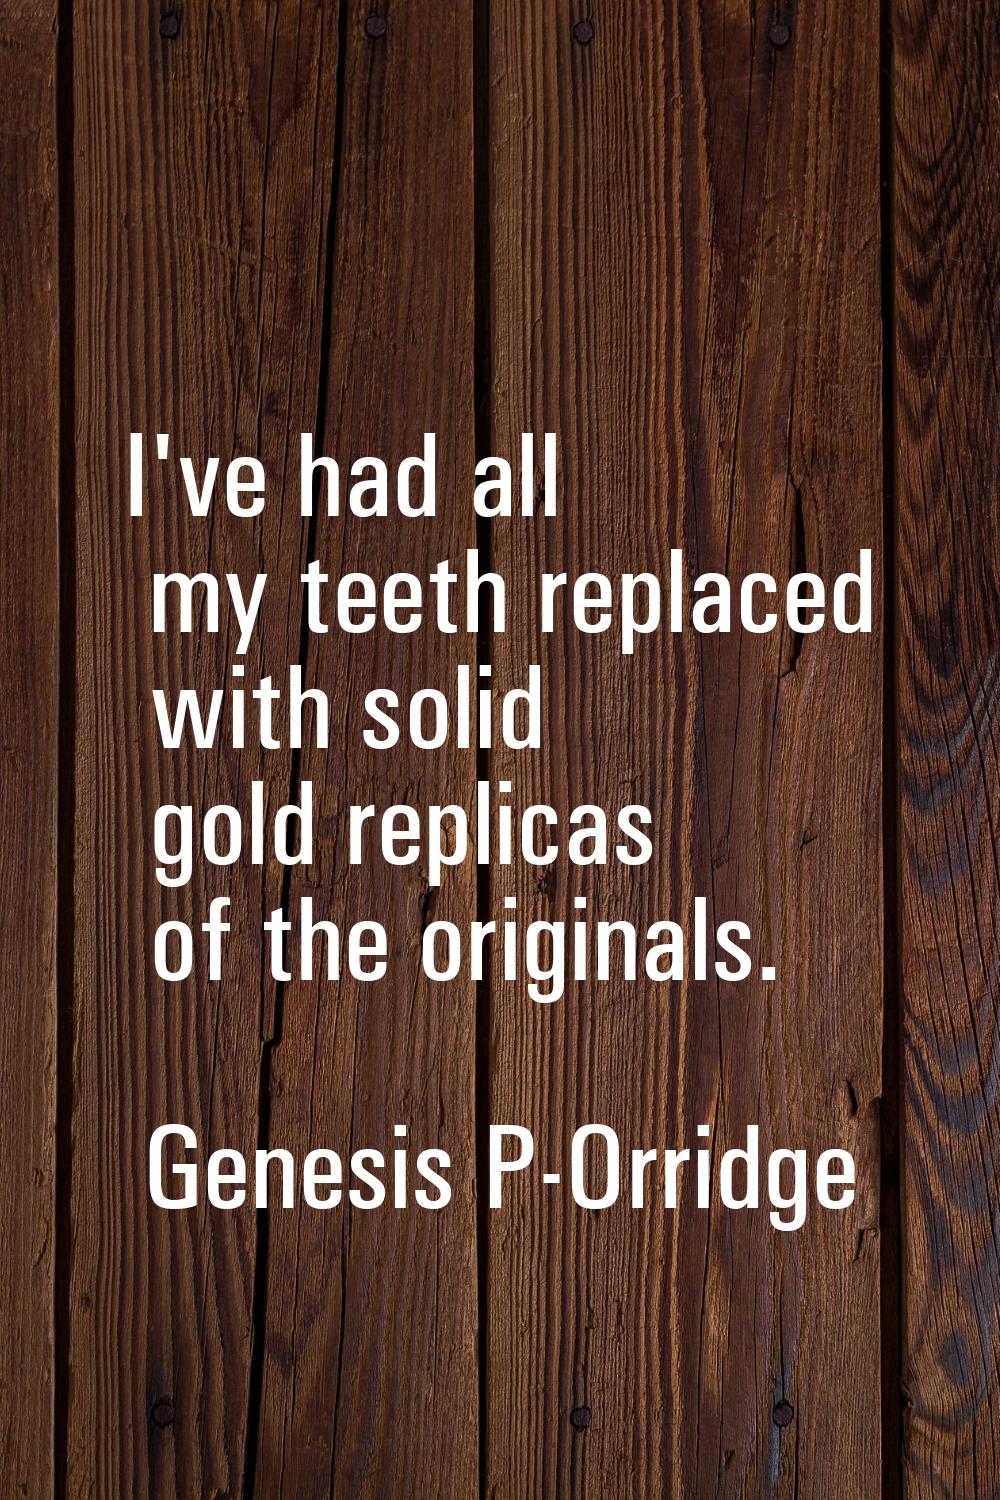 I've had all my teeth replaced with solid gold replicas of the originals.